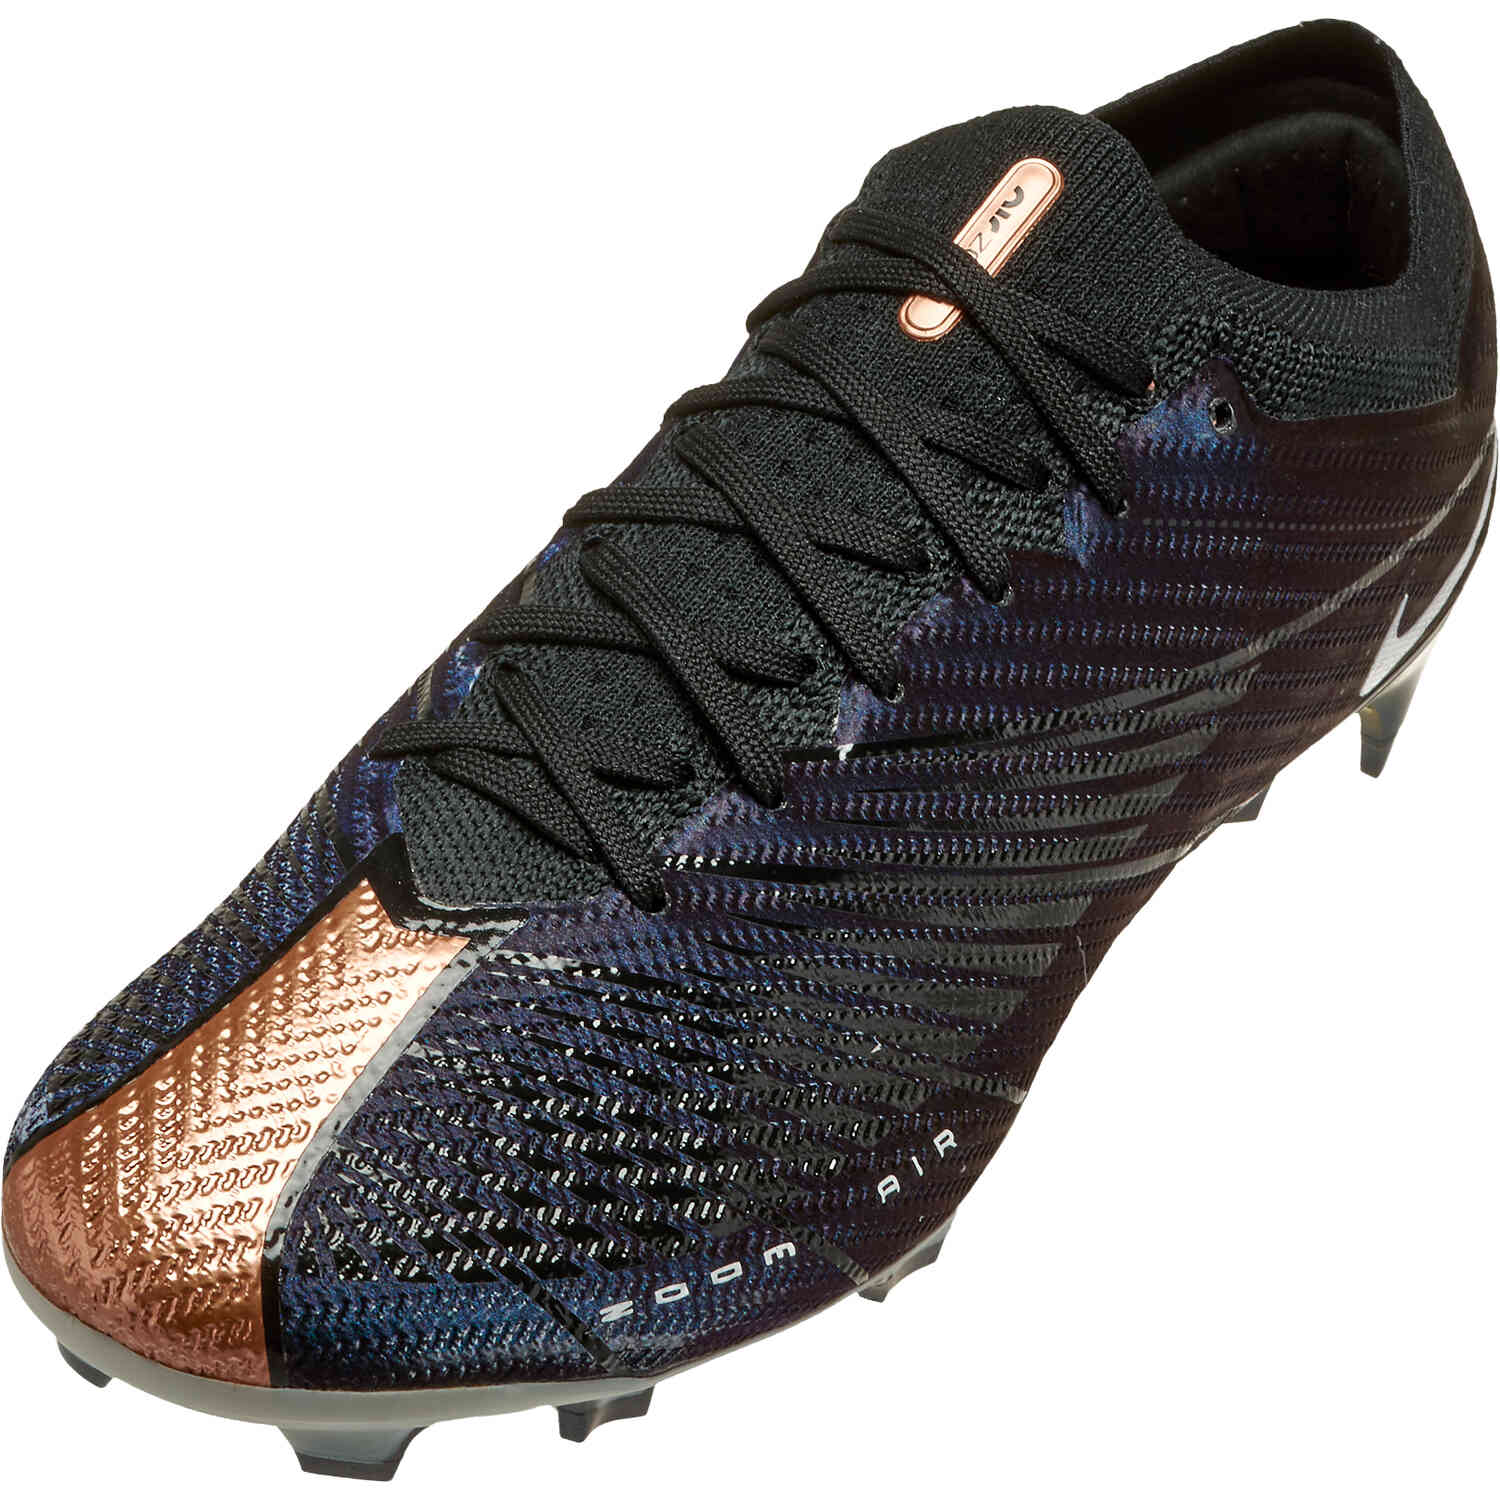 Special-Edition Nike Mercurial Vapor 15 Boots Released Inspired By 2001 ...